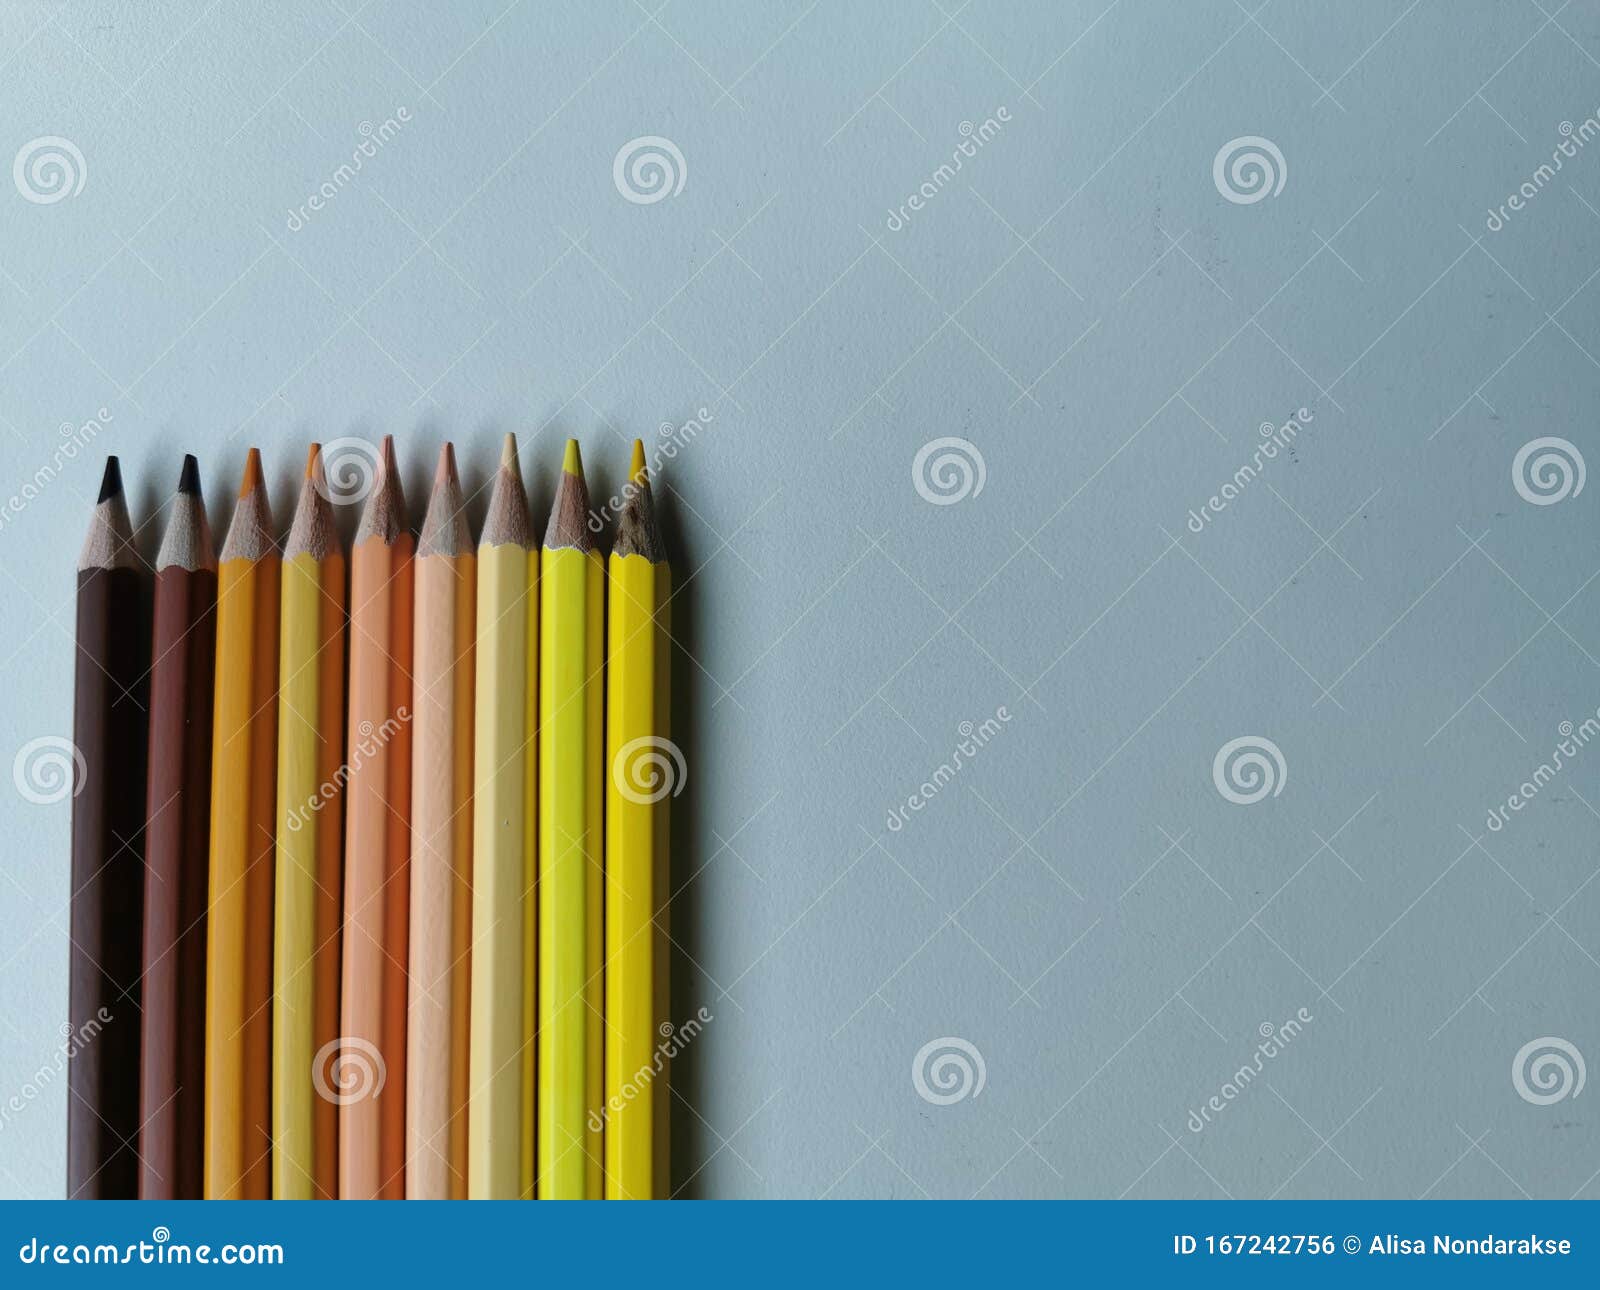 Shading Pencils with Sun Light Stock Photo - Image of meet, background:  167242756